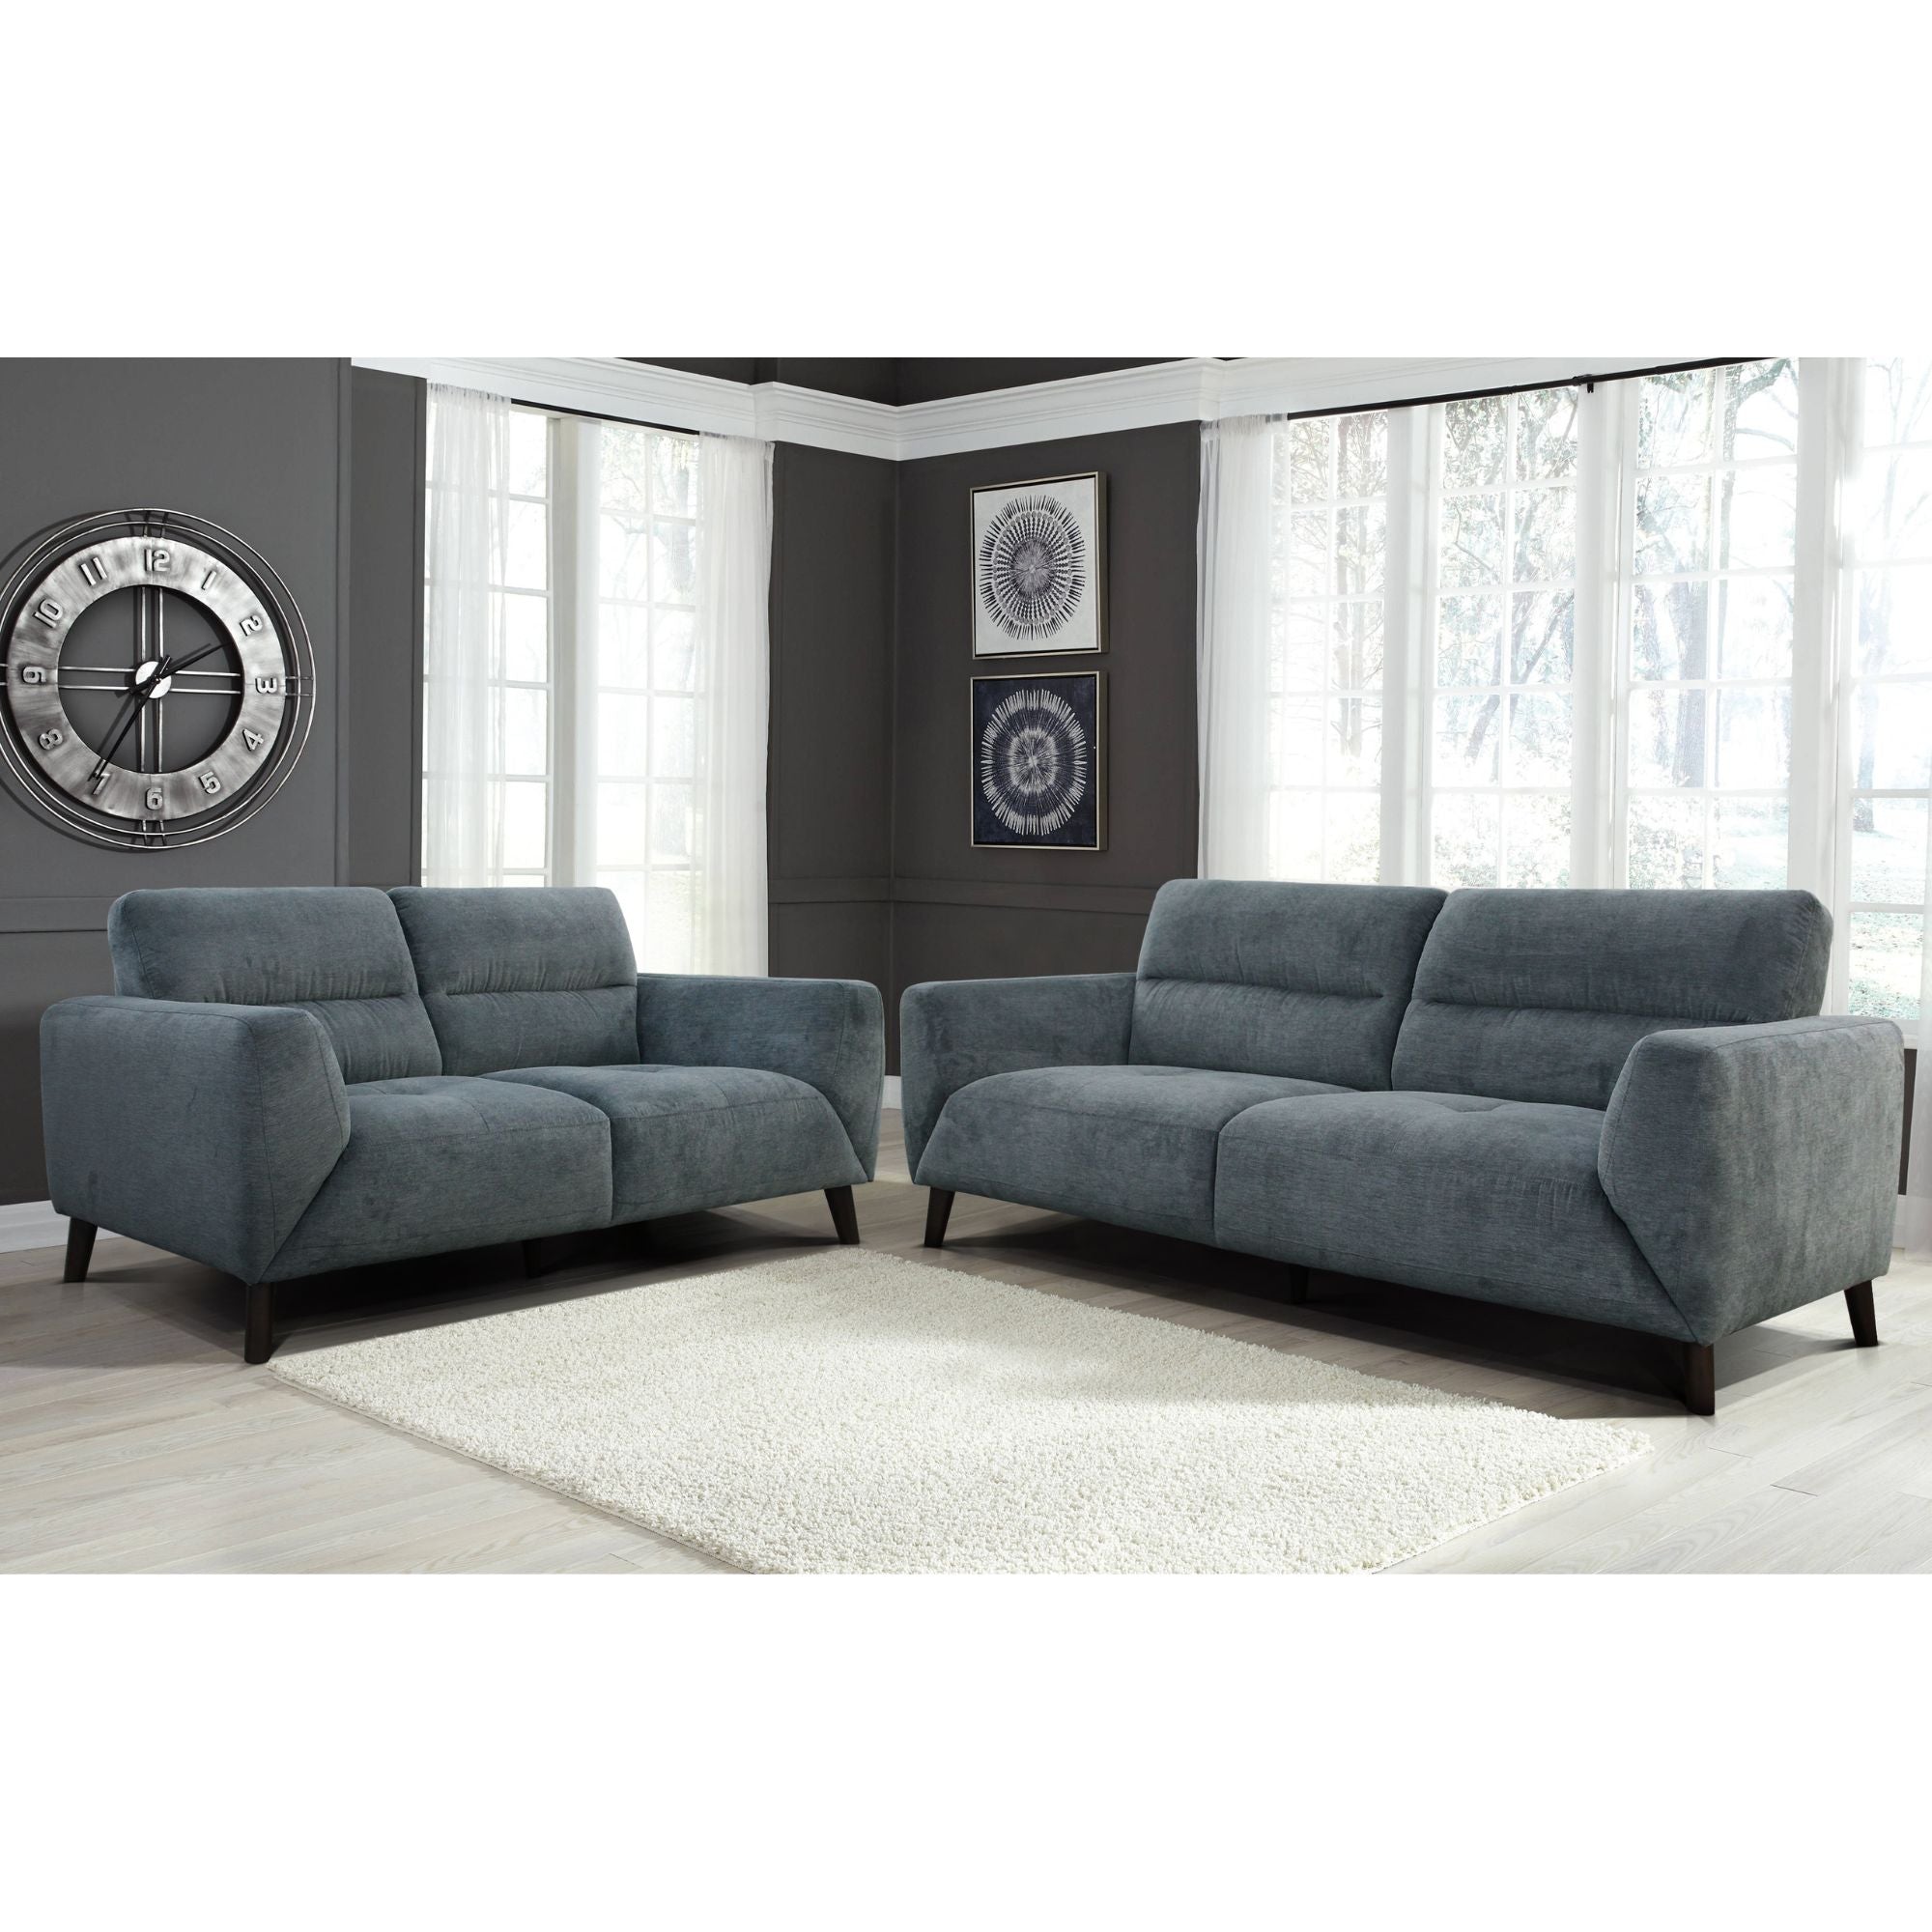 Monarch 2pc 2 + 3 Seater Sofa Set Fabric Uplholstered Lounge Couch - Charcoal